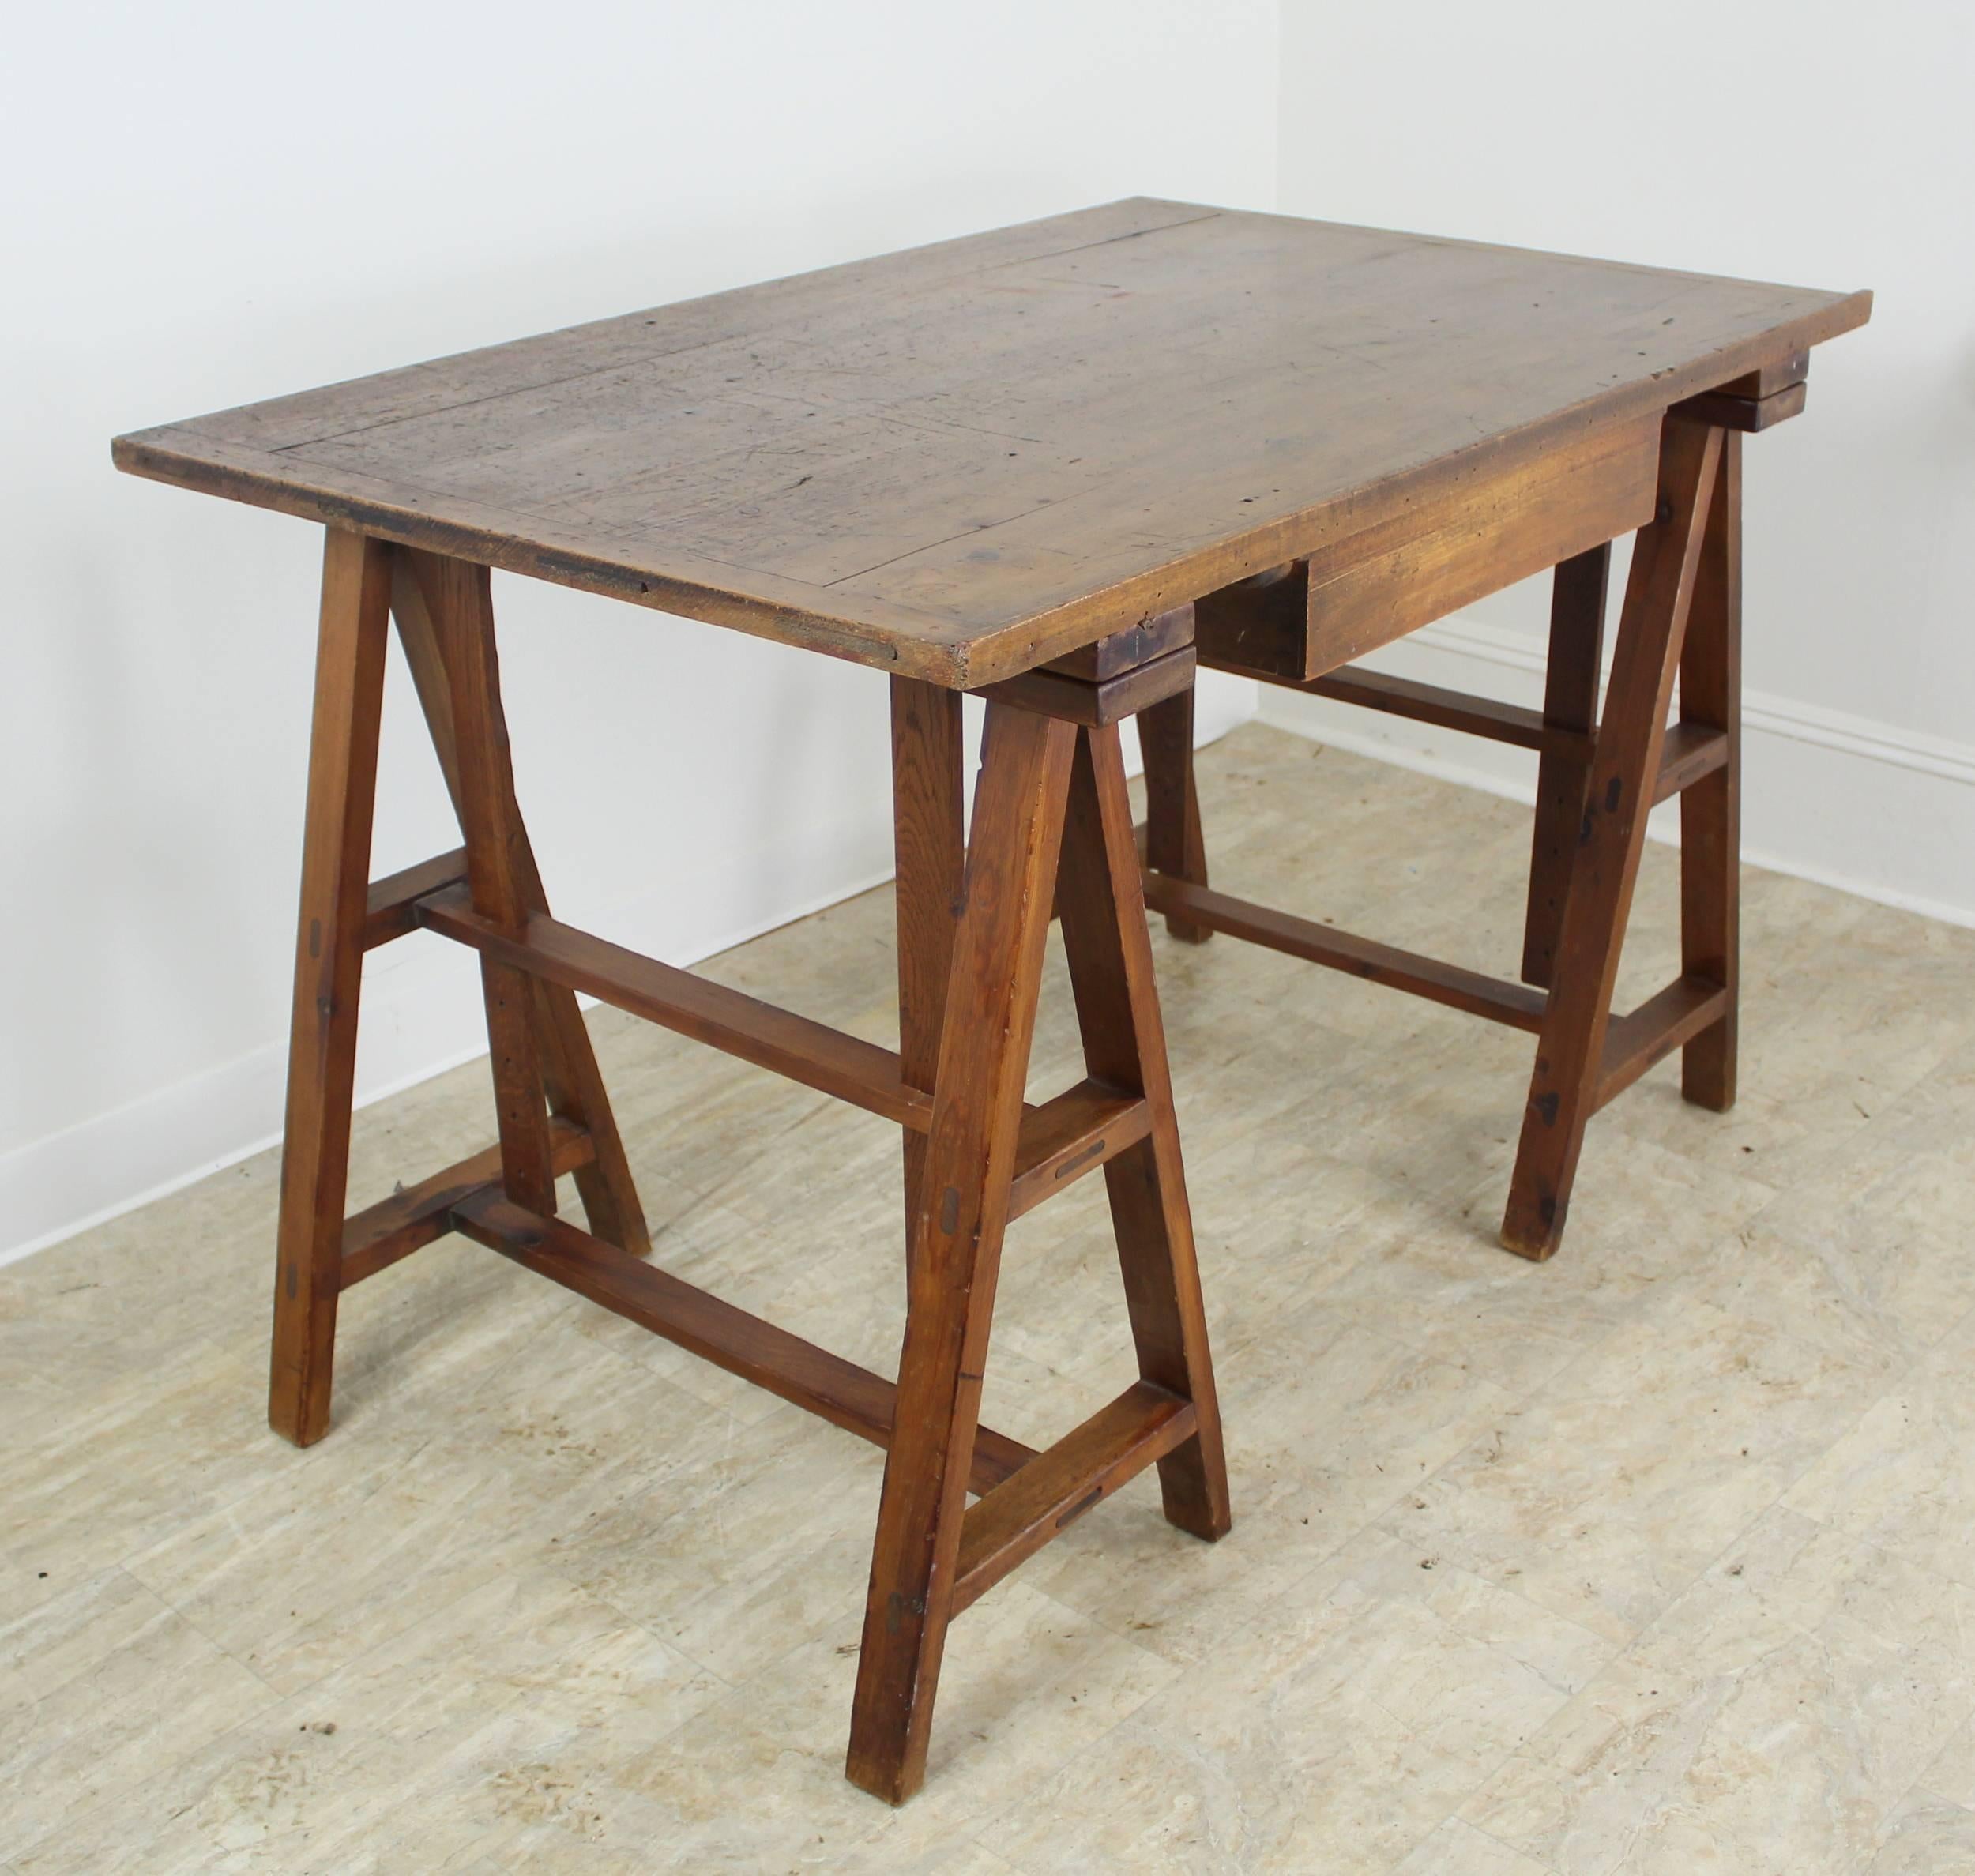 An antique pine architect's table from late 19th century, France, fully adjustable. The simple mechanism relies on four easily movable metal pegs that can change the incline of the table from flat to angled for drafting and other work. Nicely